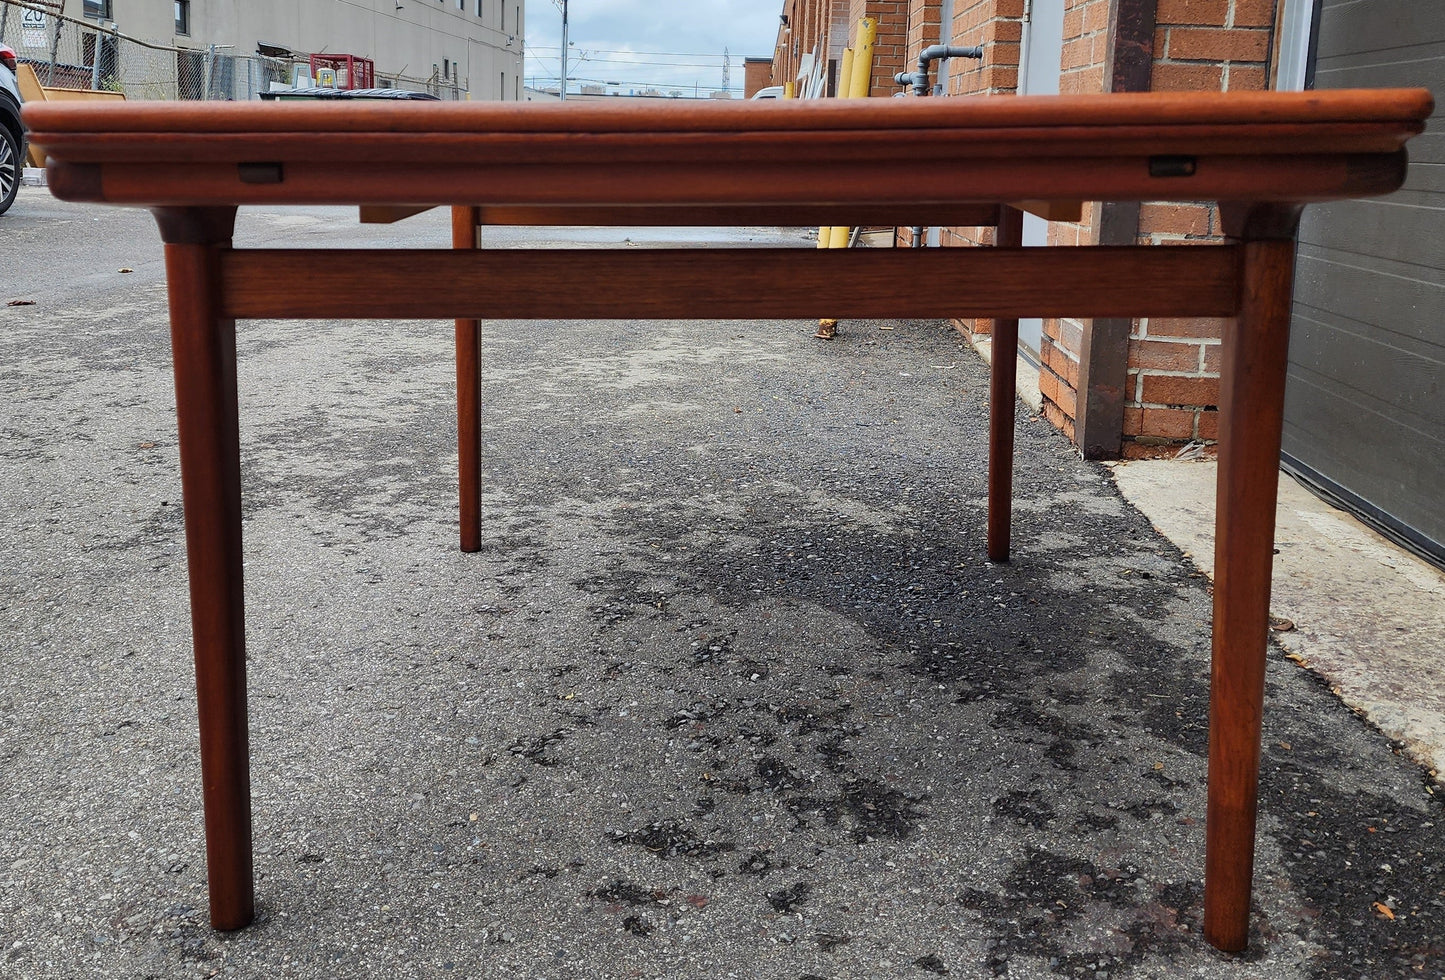 REFINISHED Danish MCM Teak Dining Table w 2 Leaves by Niels O. Moller, 63" - 102"